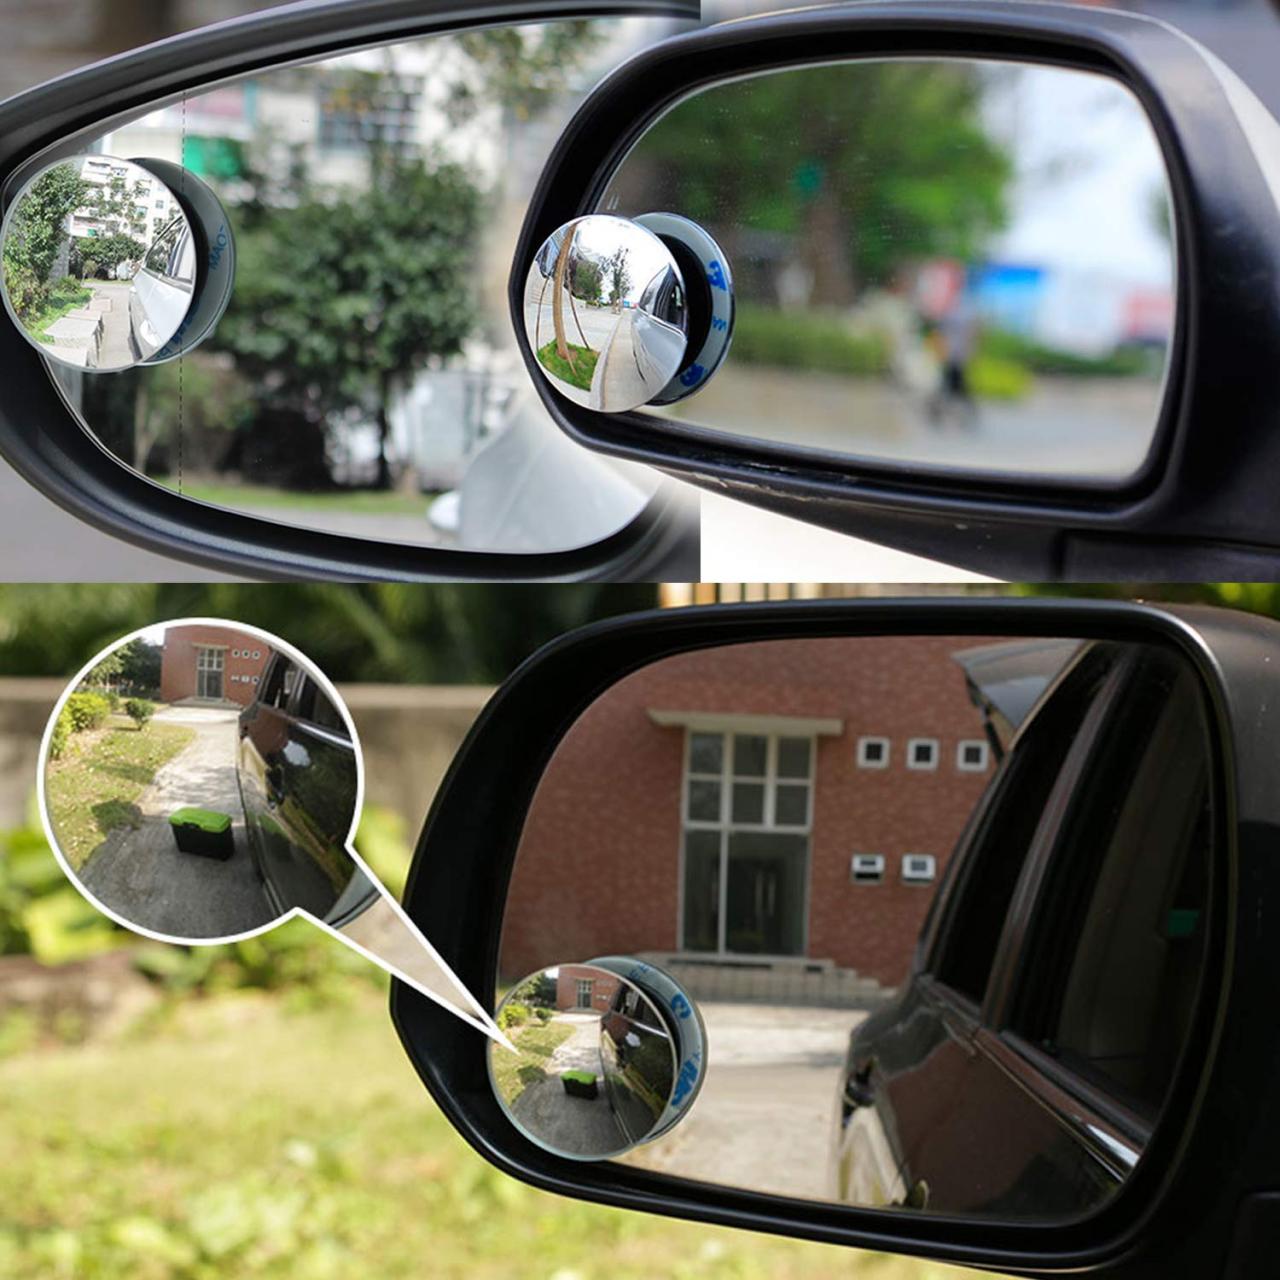 Best Blind Spot Mirrors for Driving Safety in 2021 – Complete Reviews